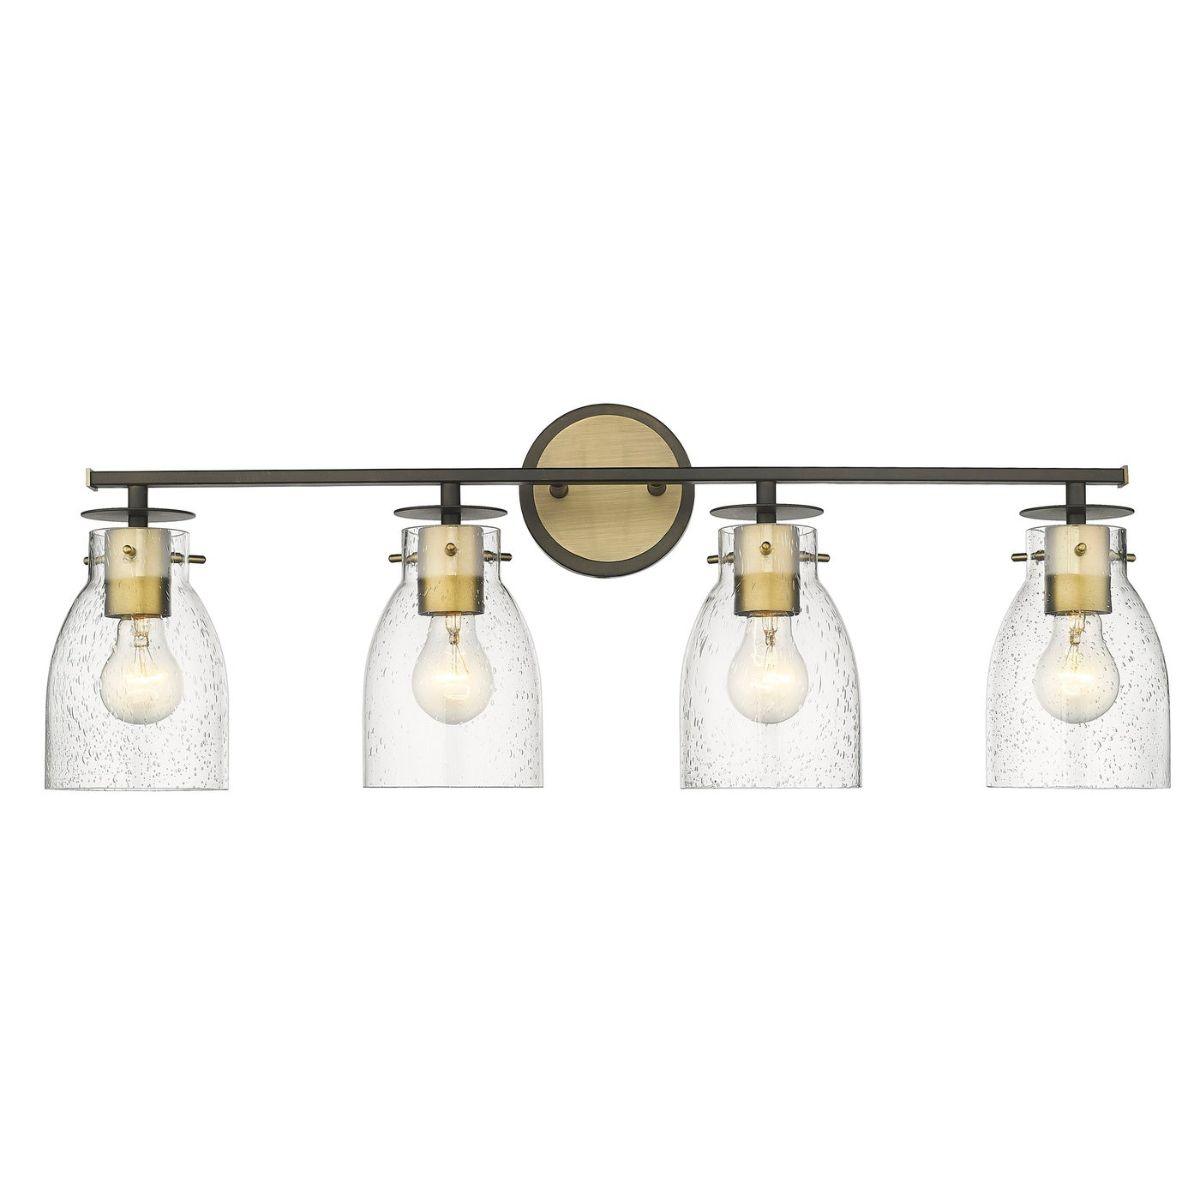 Shelby 31 in. 4 Lights Vanity Light Oil Rubbed Bronze & Antique Brass Finish